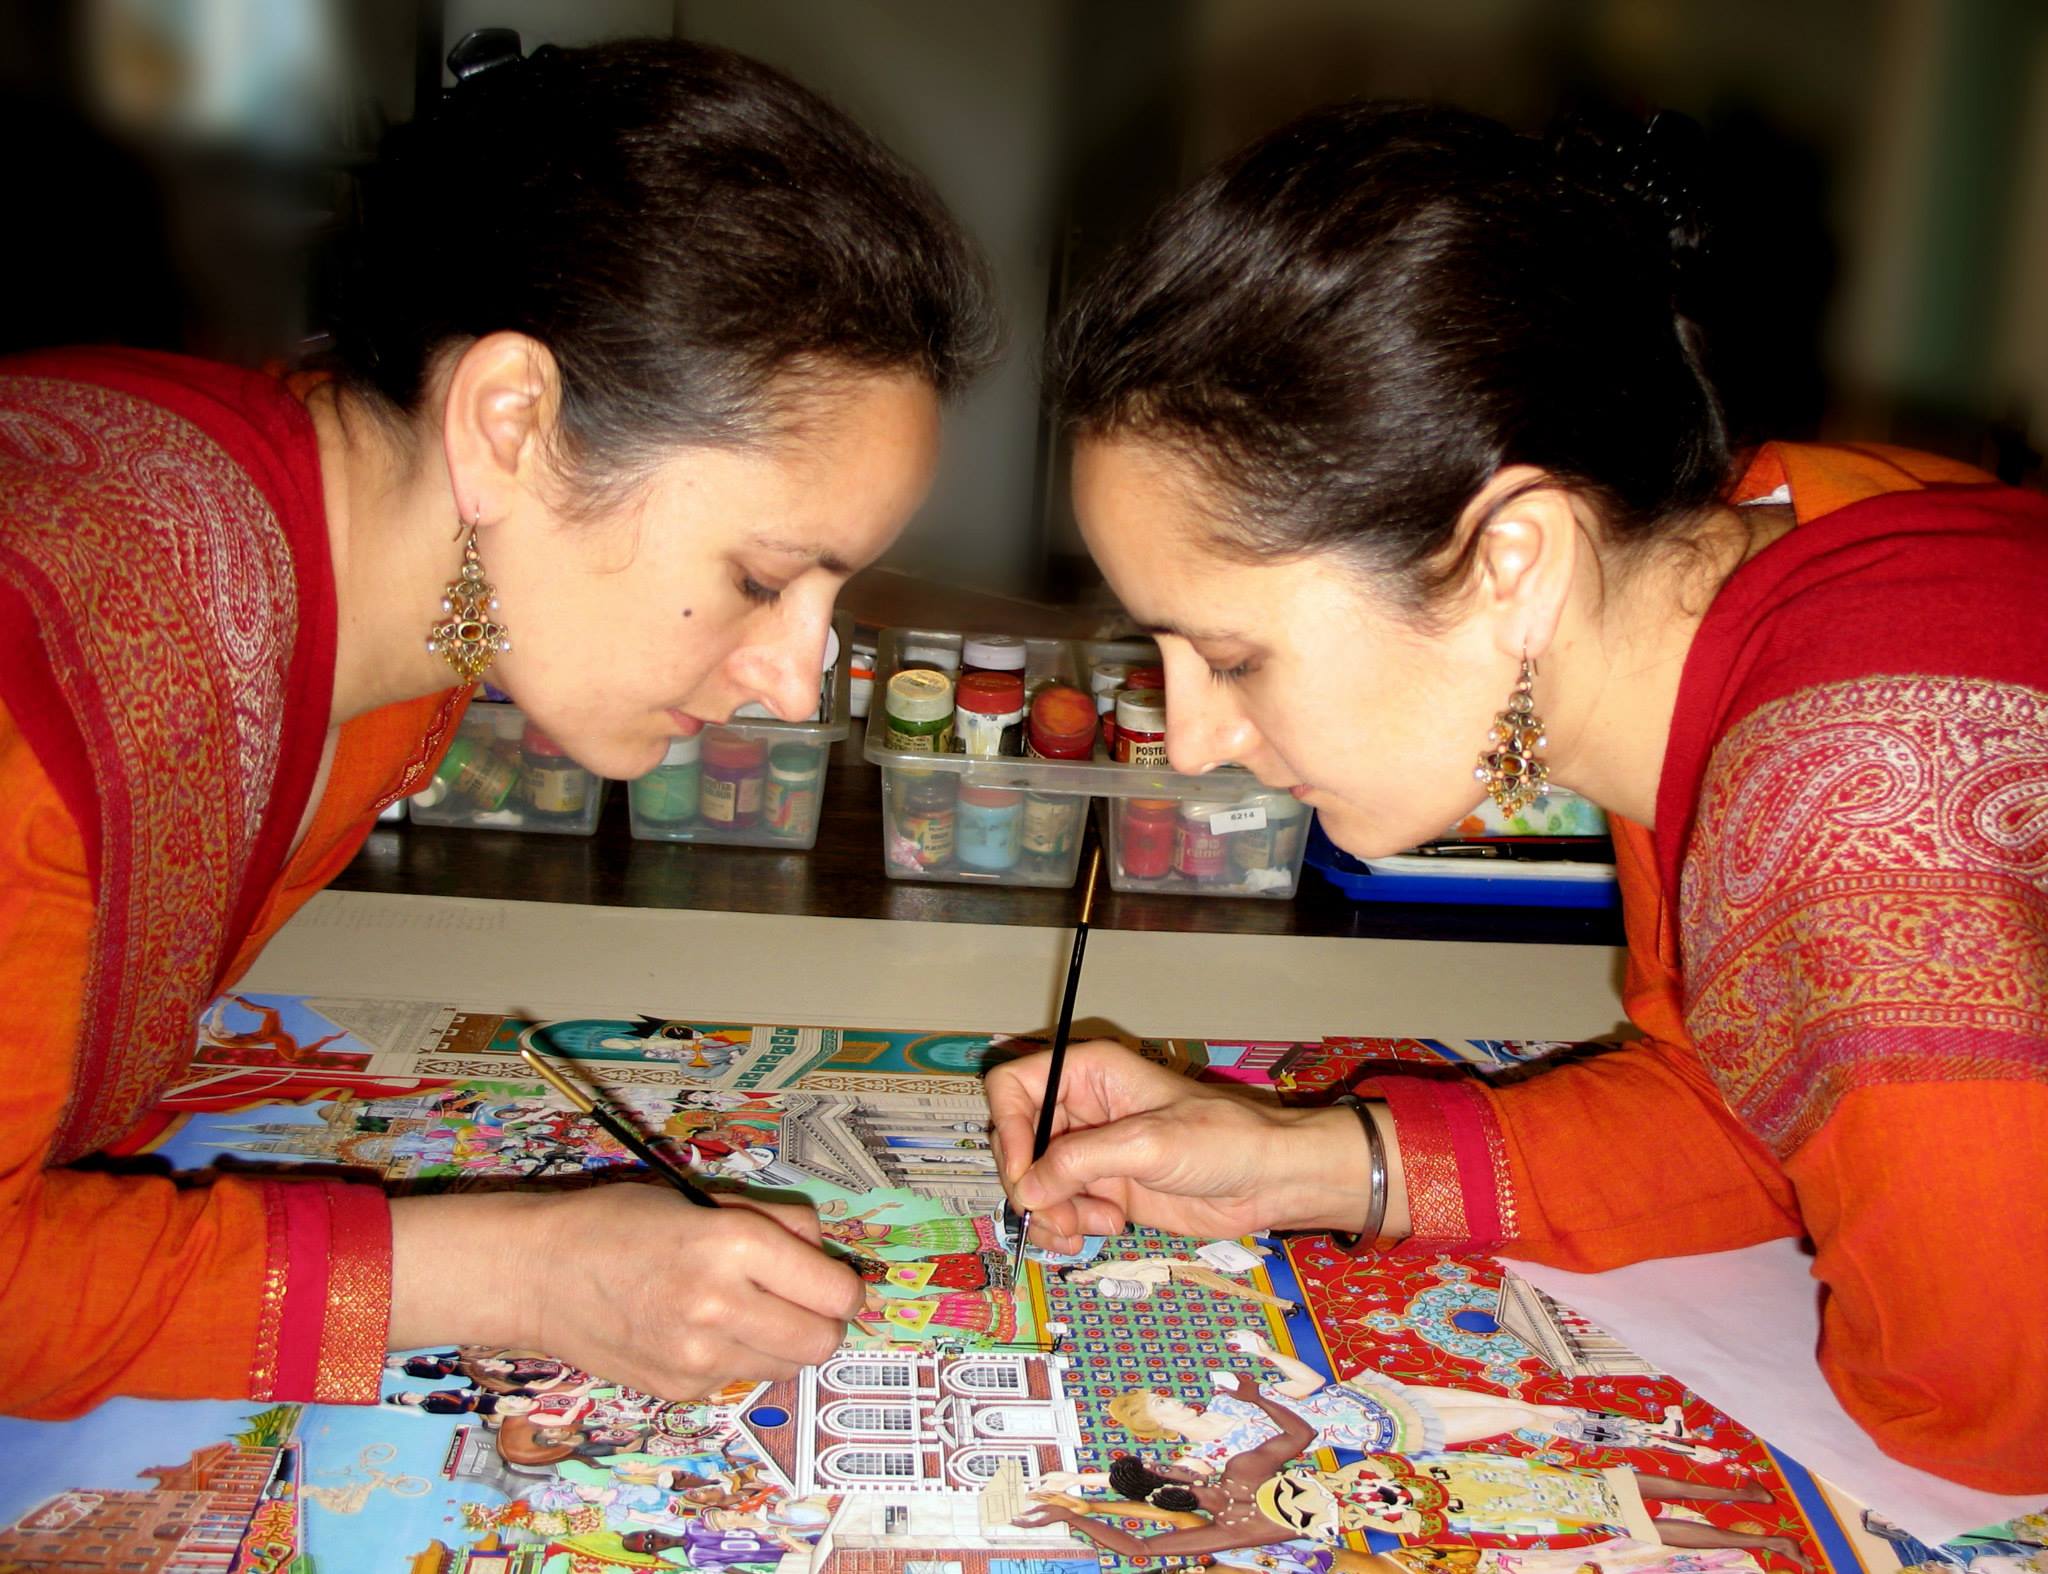 The Singh Twins both working on a painting